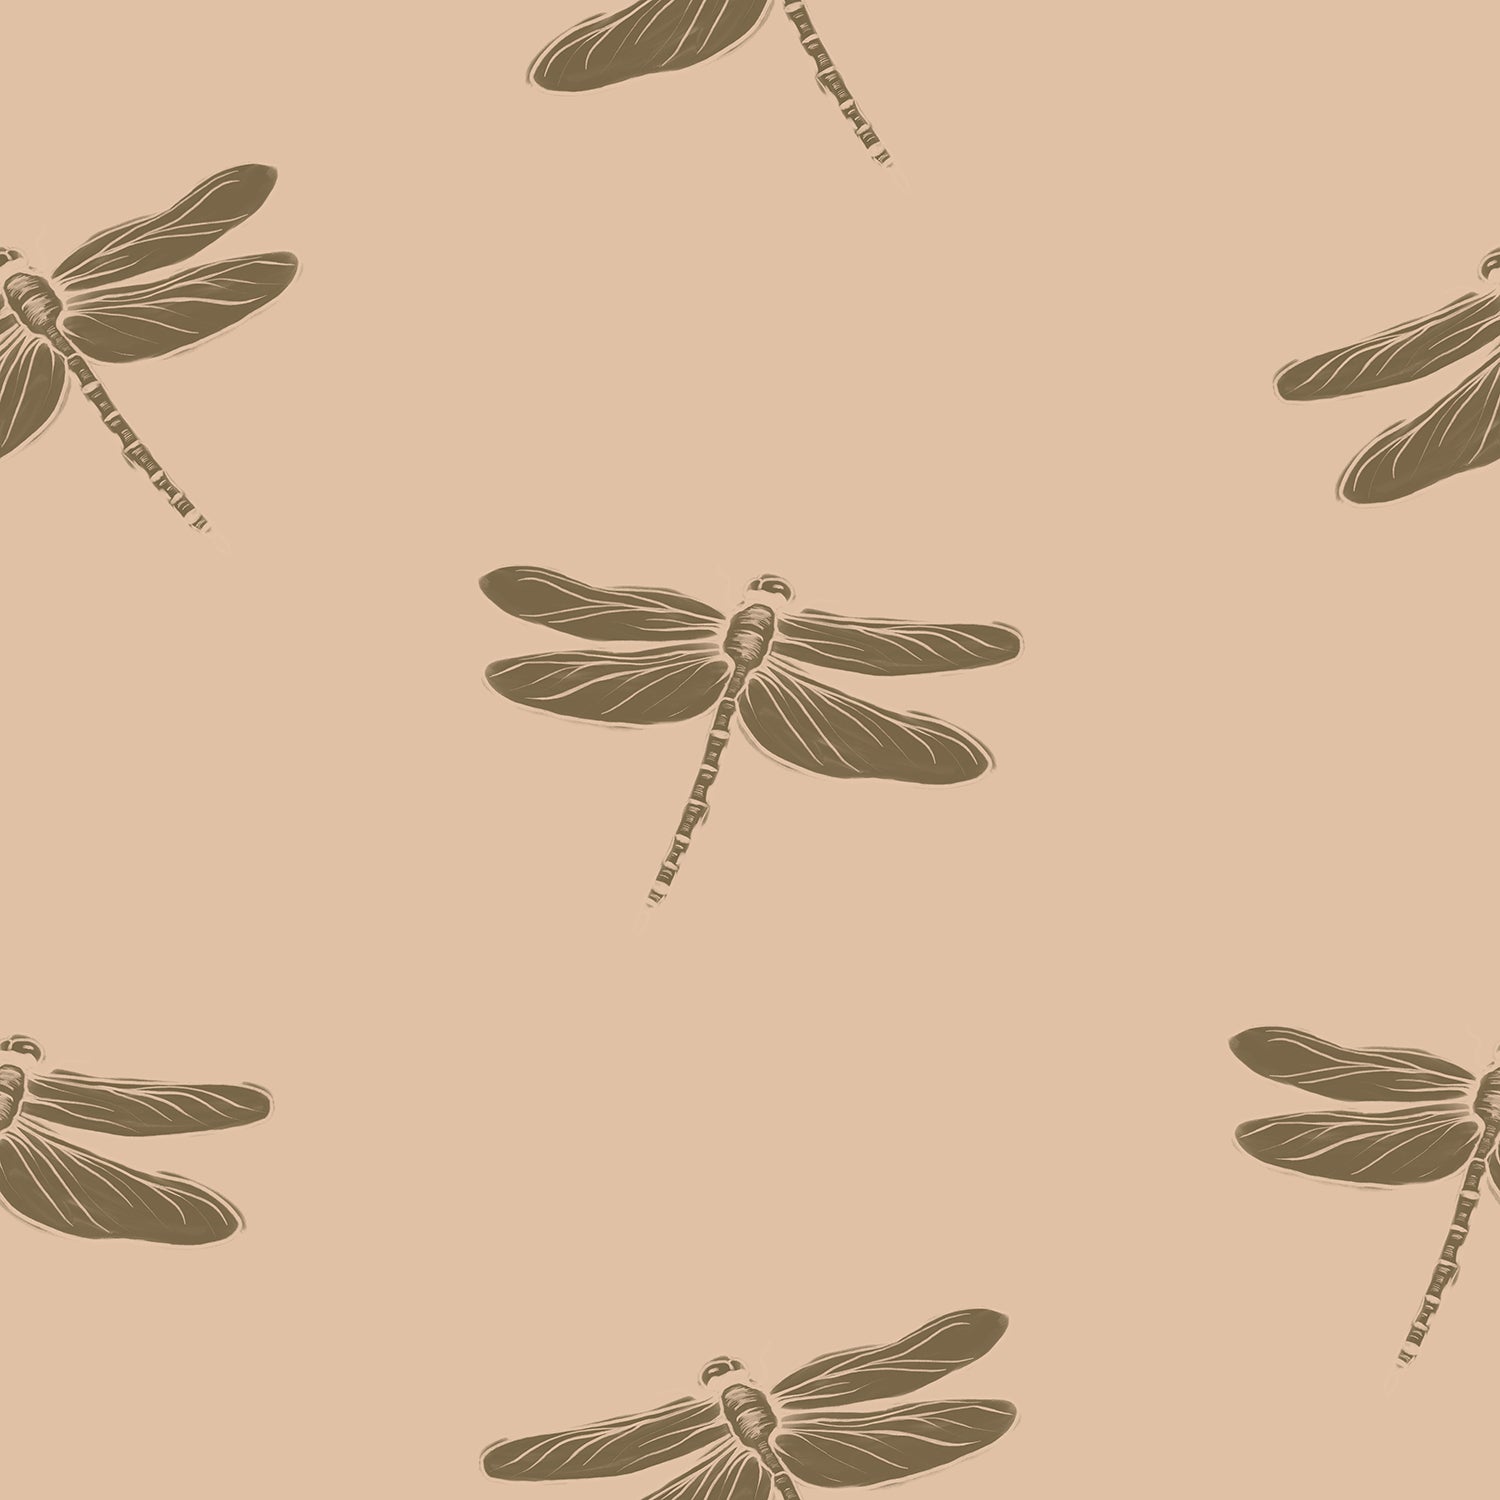 A simple yet elegant wallpaper featuring a repeating pattern of sketched dragonflies on a warm beige background, capturing the essence of autumn with its understated color palette